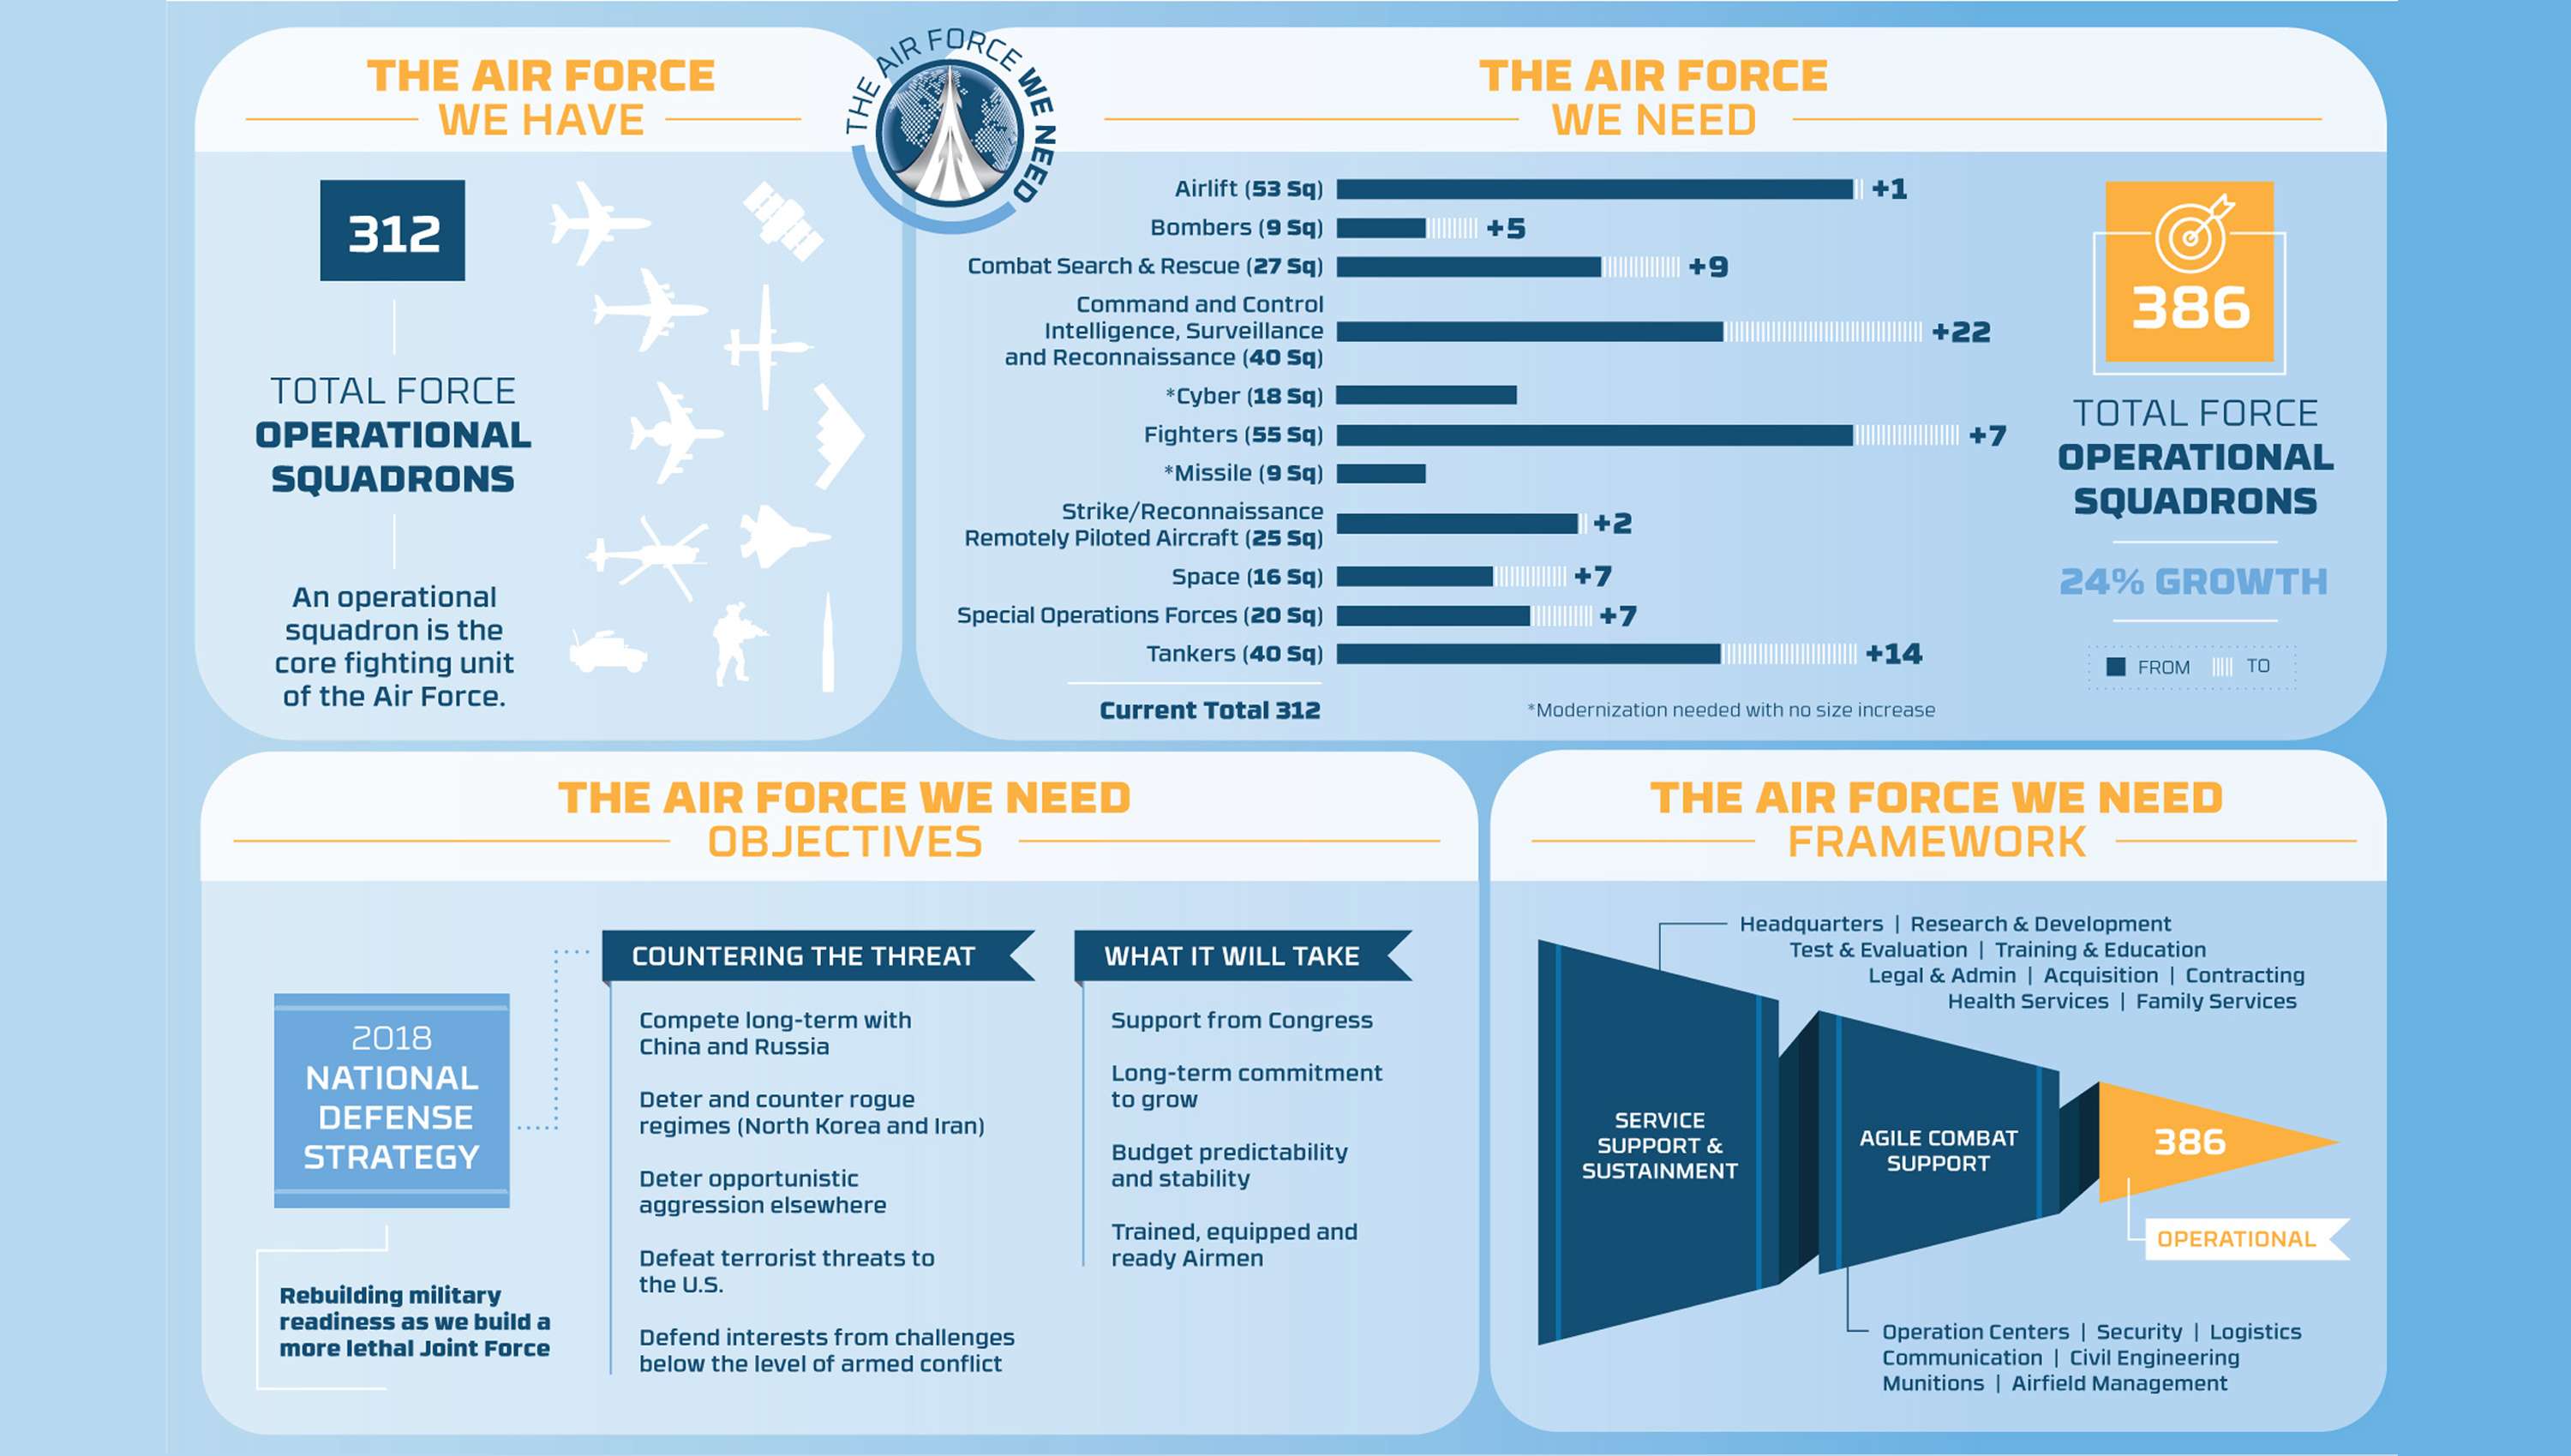 USAF: Design-Forward Presentation Grabs Attention For Air Force Powerpoint Template